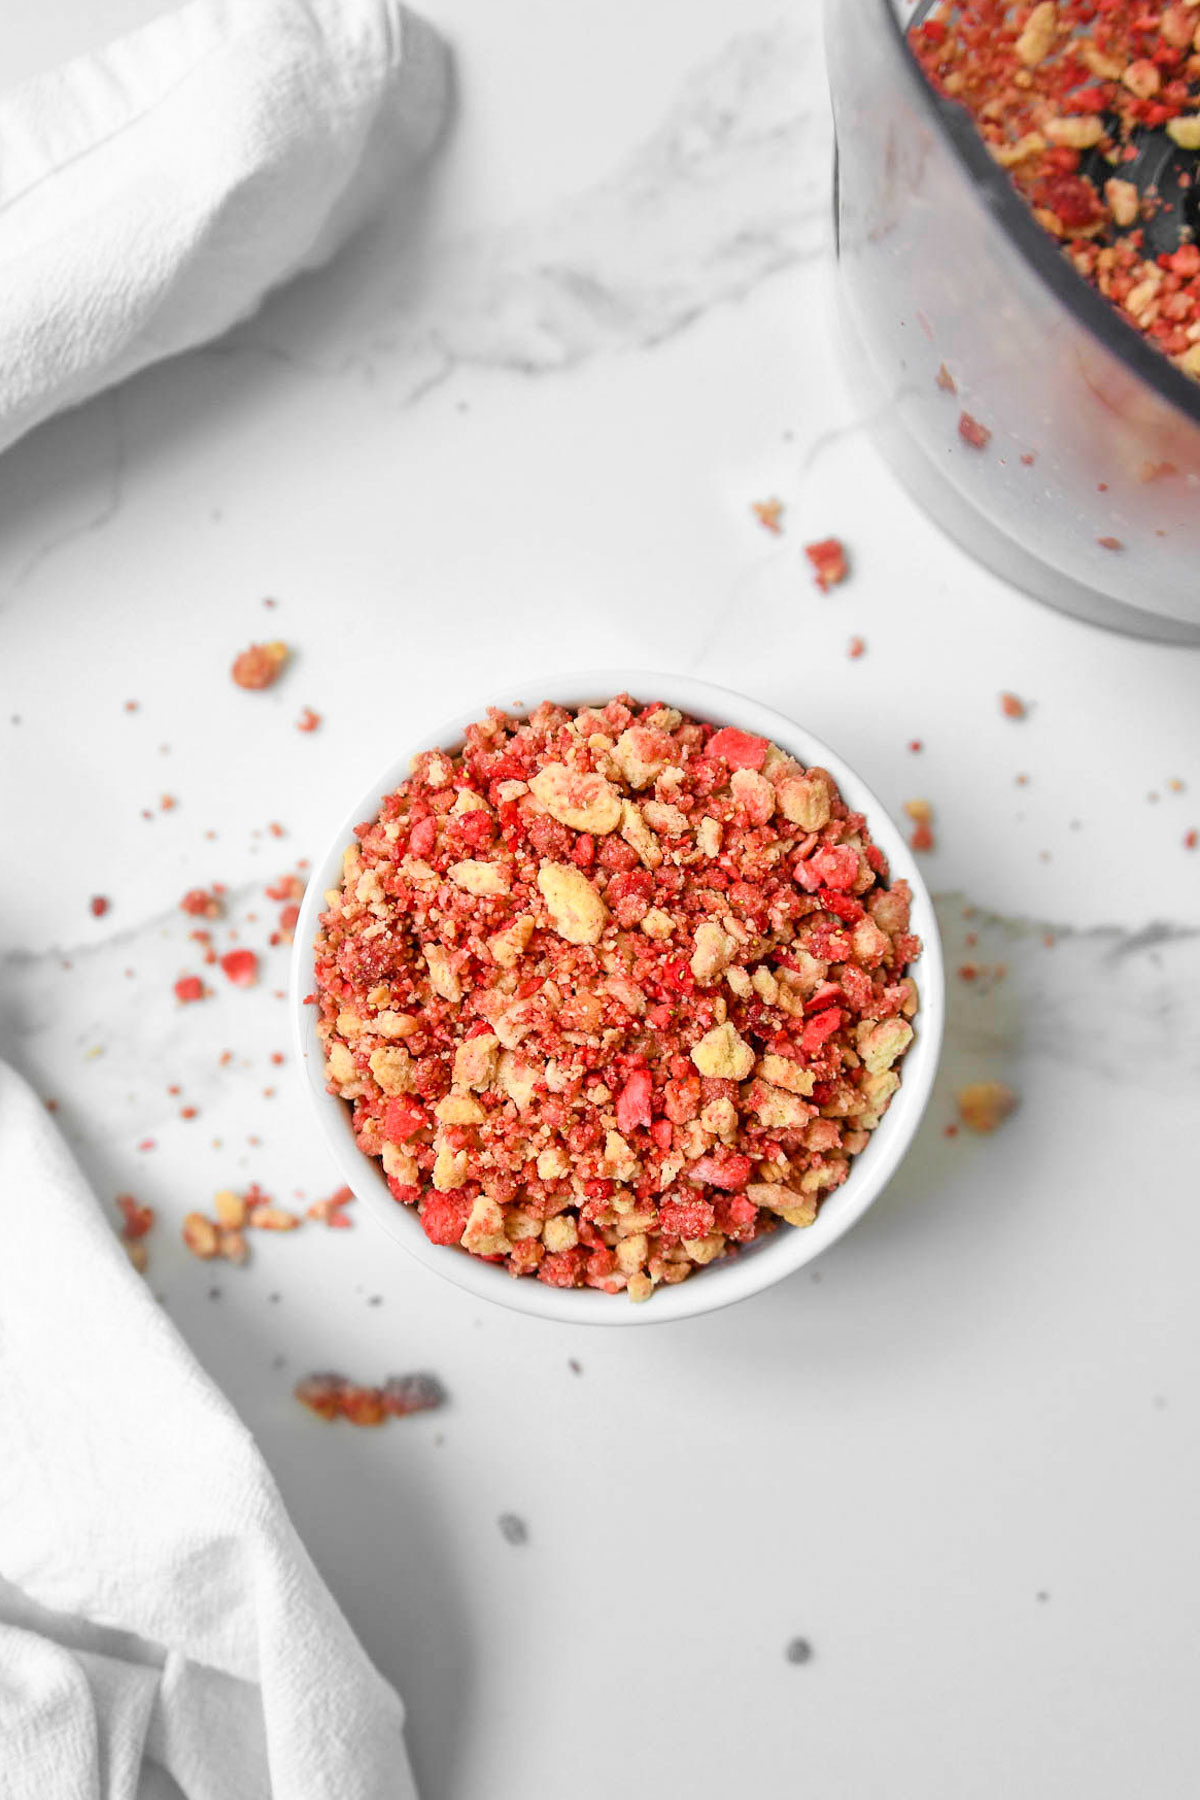 Strawberry crunch crumble topping in small bowl, ready for use.